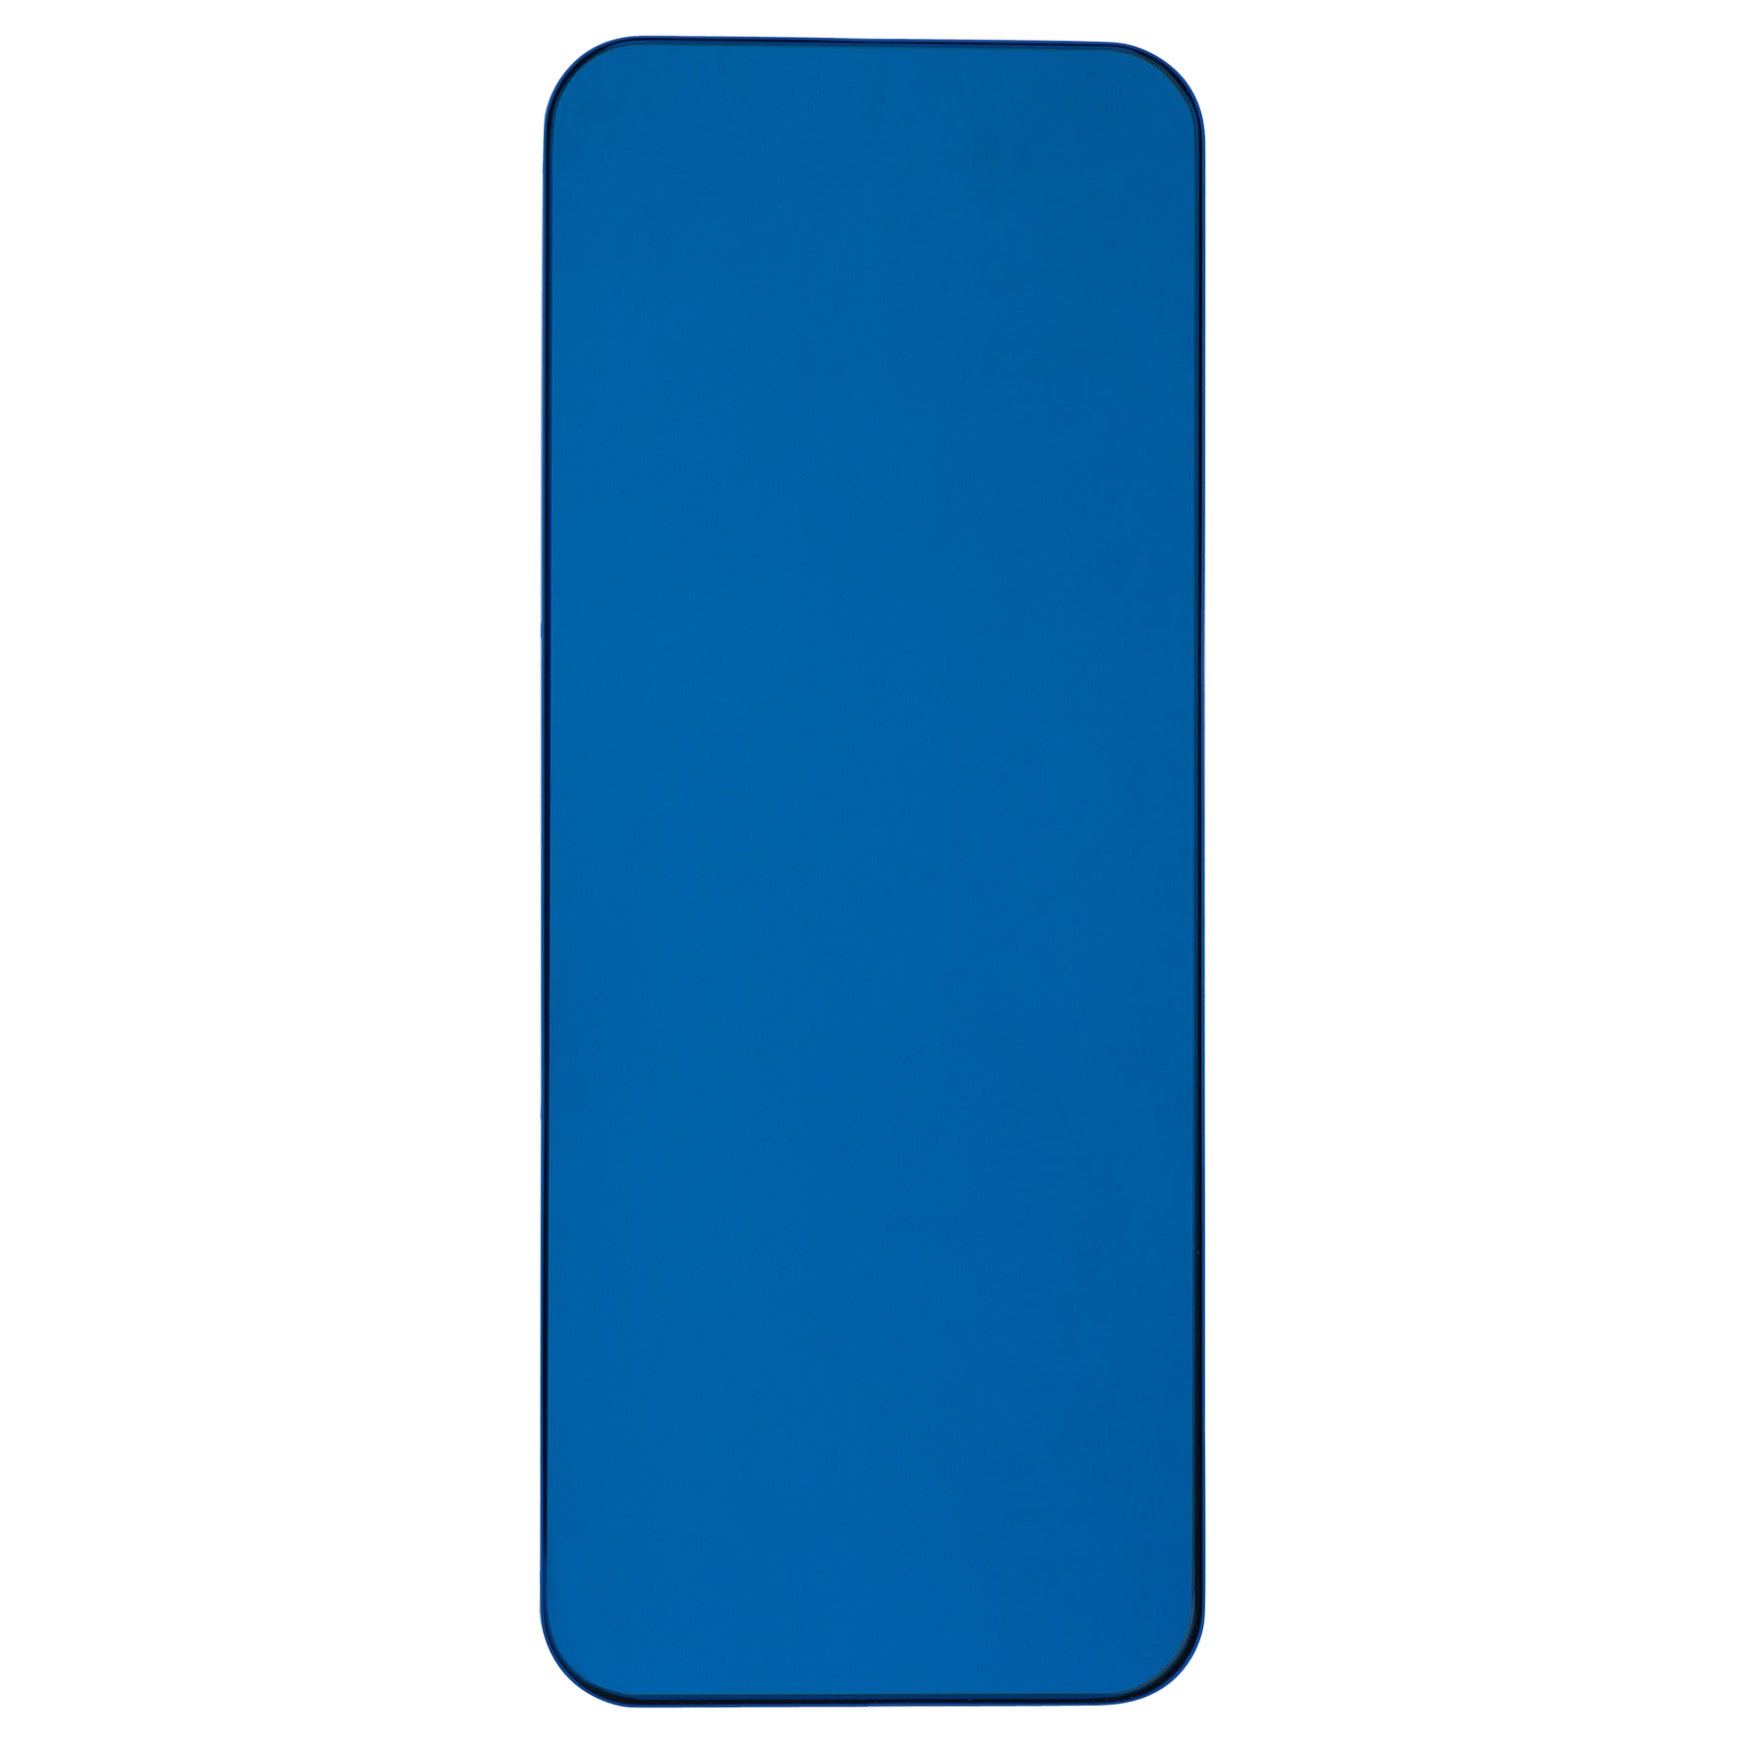 Quadris Rectangular Contemporary Blue Tinted Mirror with a Blue Frame, Large For Sale